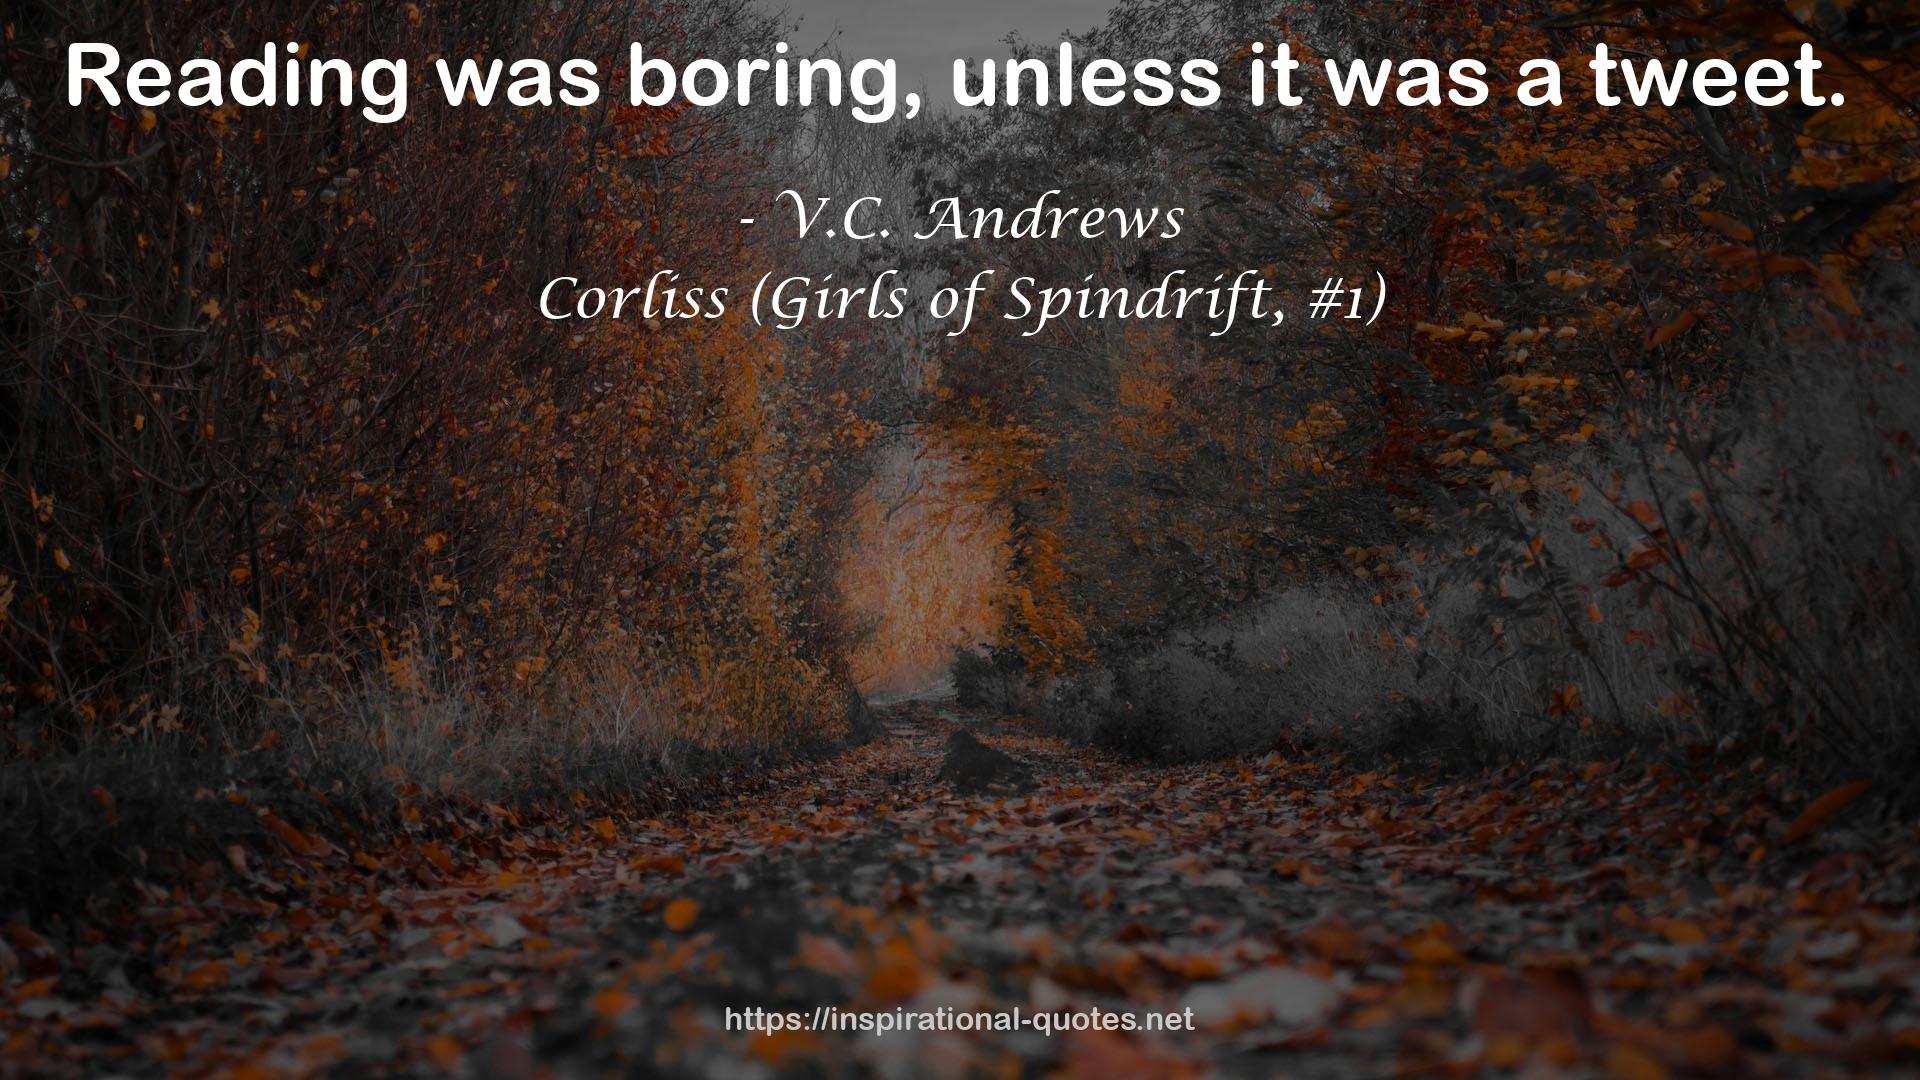 Corliss (Girls of Spindrift, #1) QUOTES